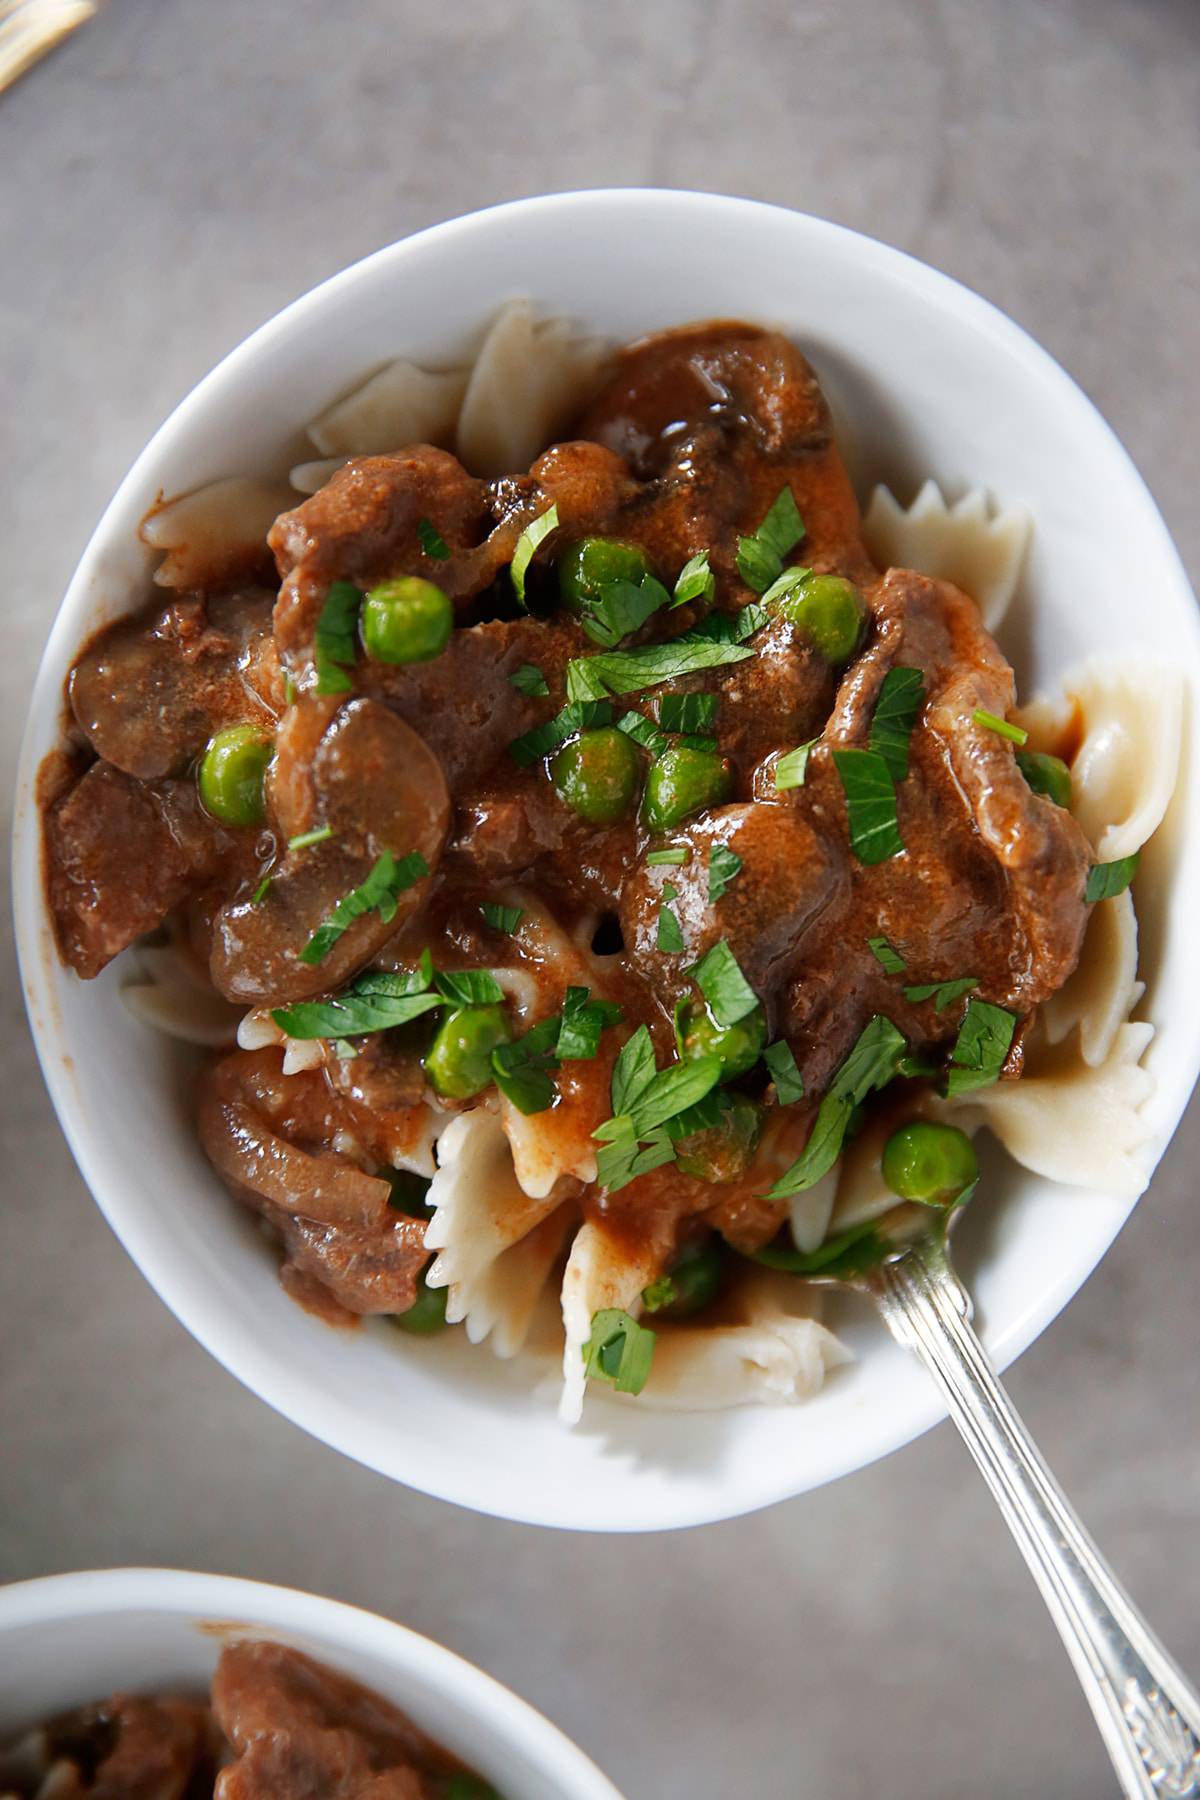 How do you make beef stroganoff in a pressure cooker